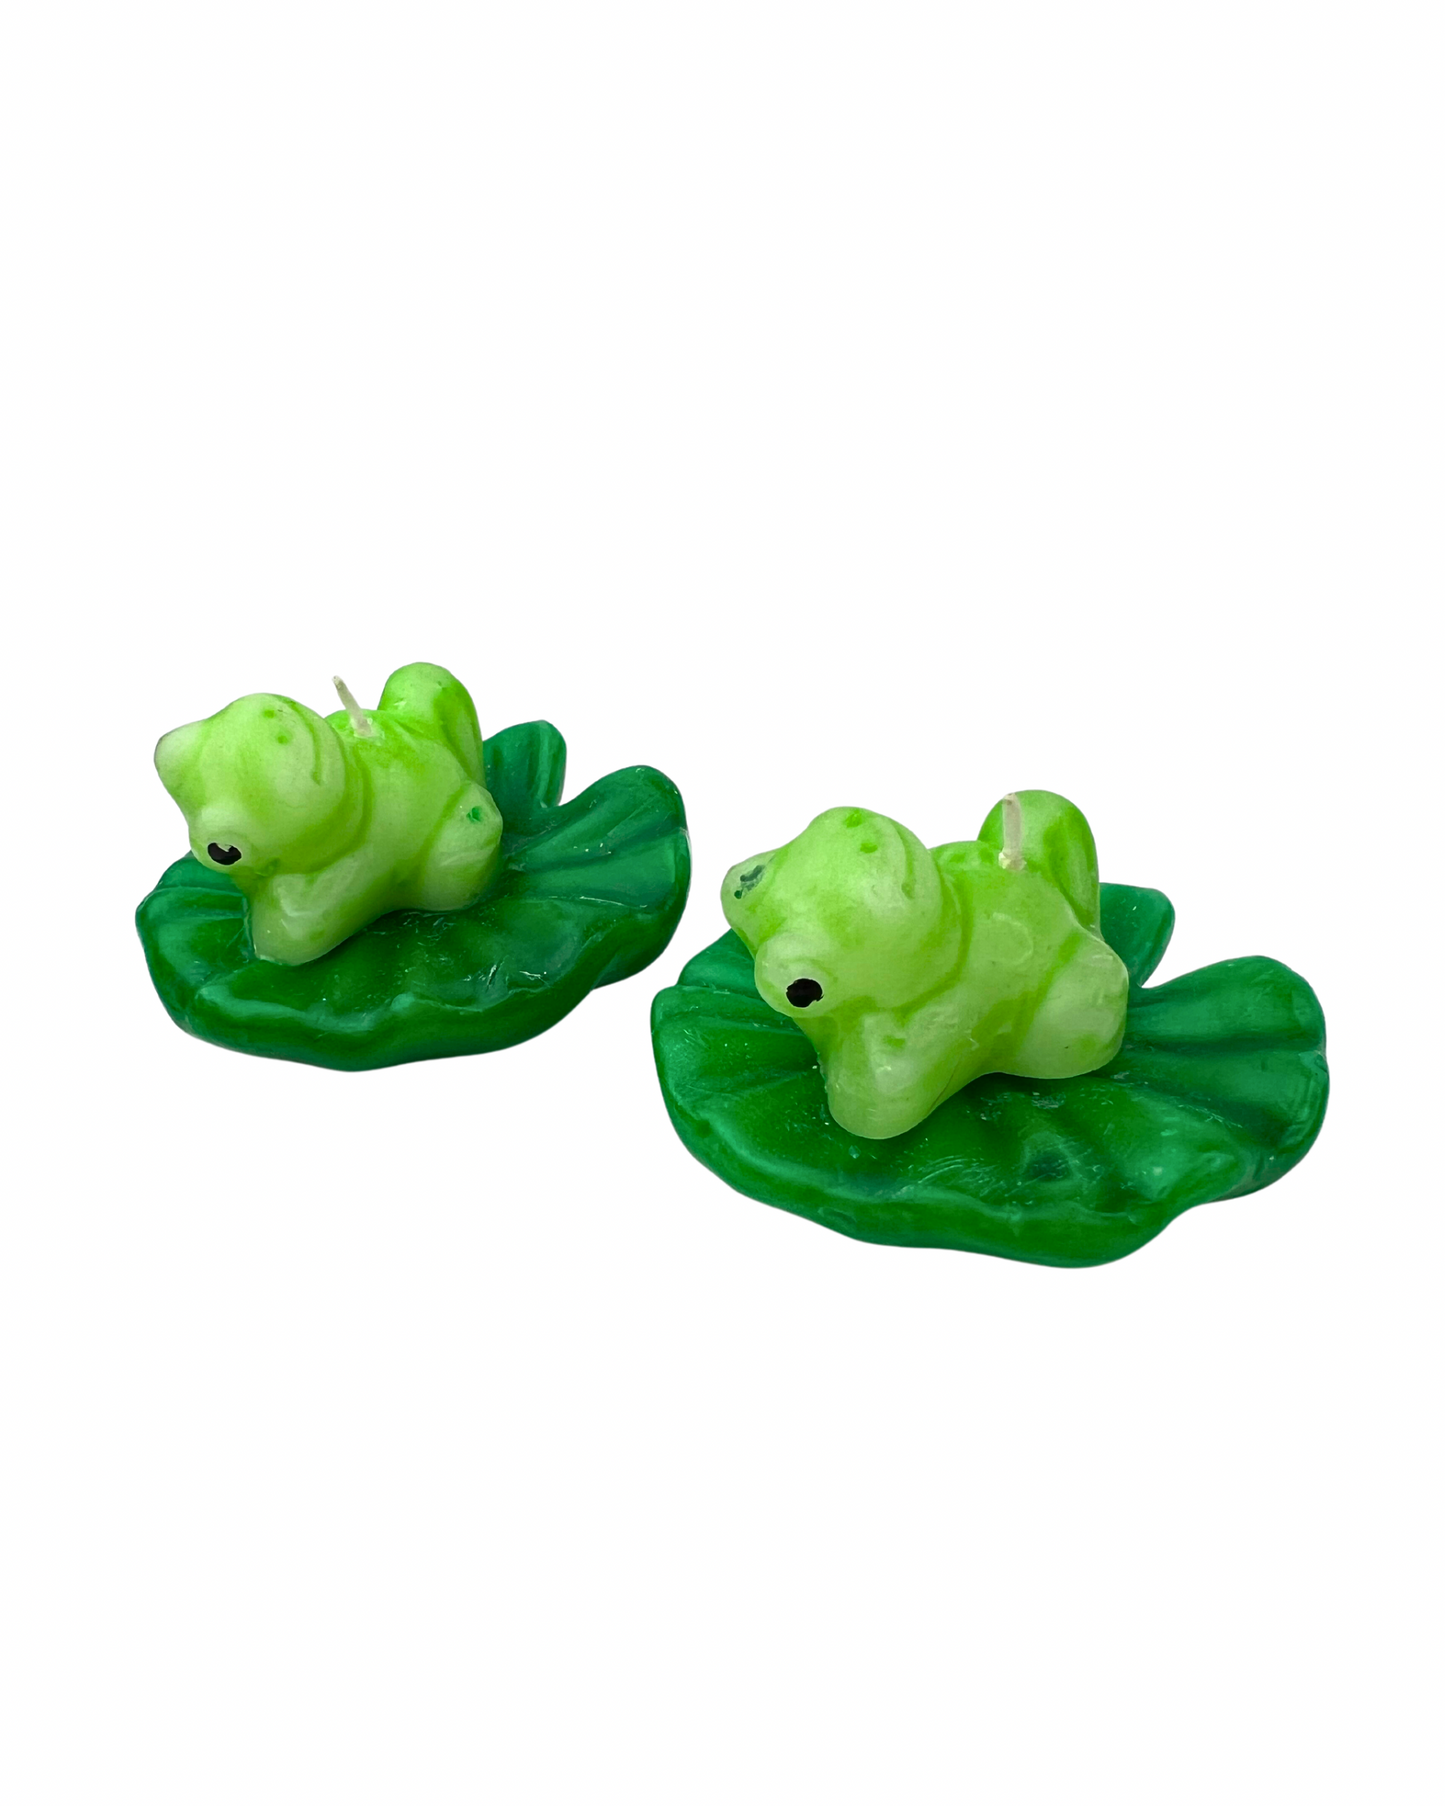 00’s Y2K Set of 2 Floating Frogs Candles